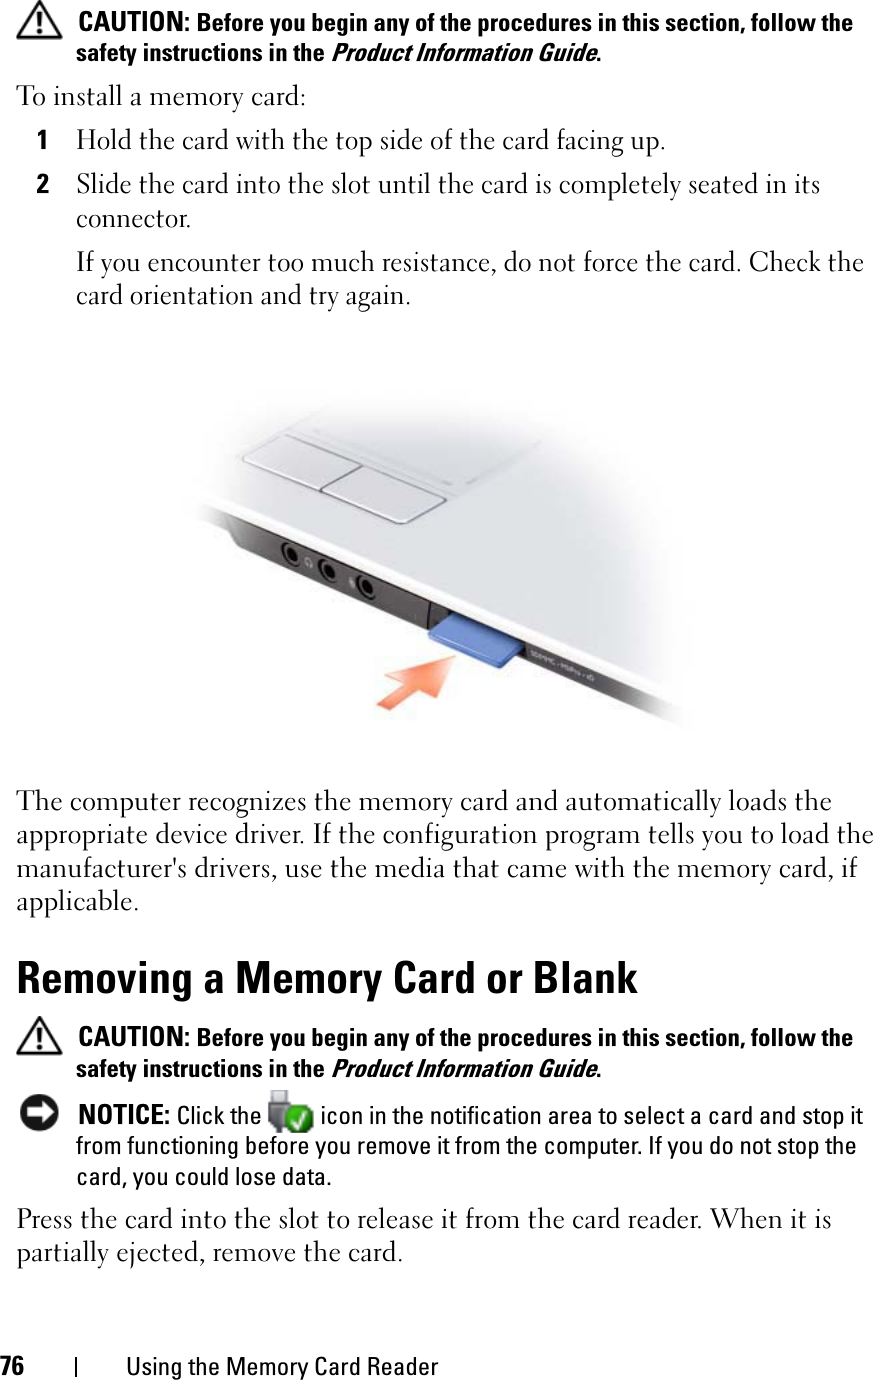 76 Using the Memory Card ReaderCAUTION: Before you begin any of the procedures in this section, follow the safety instructions in the Product Information Guide.To install a memory card:1Hold the card with the top side of the card facing up. 2Slide the card into the slot until the card is completely seated in its connector. If you encounter too much resistance, do not force the card. Check the card orientation and try again.The computer recognizes the memory card and automatically loads the appropriate device driver. If the configuration program tells you to load the manufacturer&apos;s drivers, use the media that came with the memory card, if applicable.Removing a Memory Card or BlankCAUTION: Before you begin any of the procedures in this section, follow the safety instructions in the Product Information Guide.NOTICE: Click the  icon in the notification area to select a card and stop it from functioning before you remove it from the computer. If you do not stop the card, you could lose data. Press the card into the slot to release it from the card reader. When it is partially ejected, remove the card. 